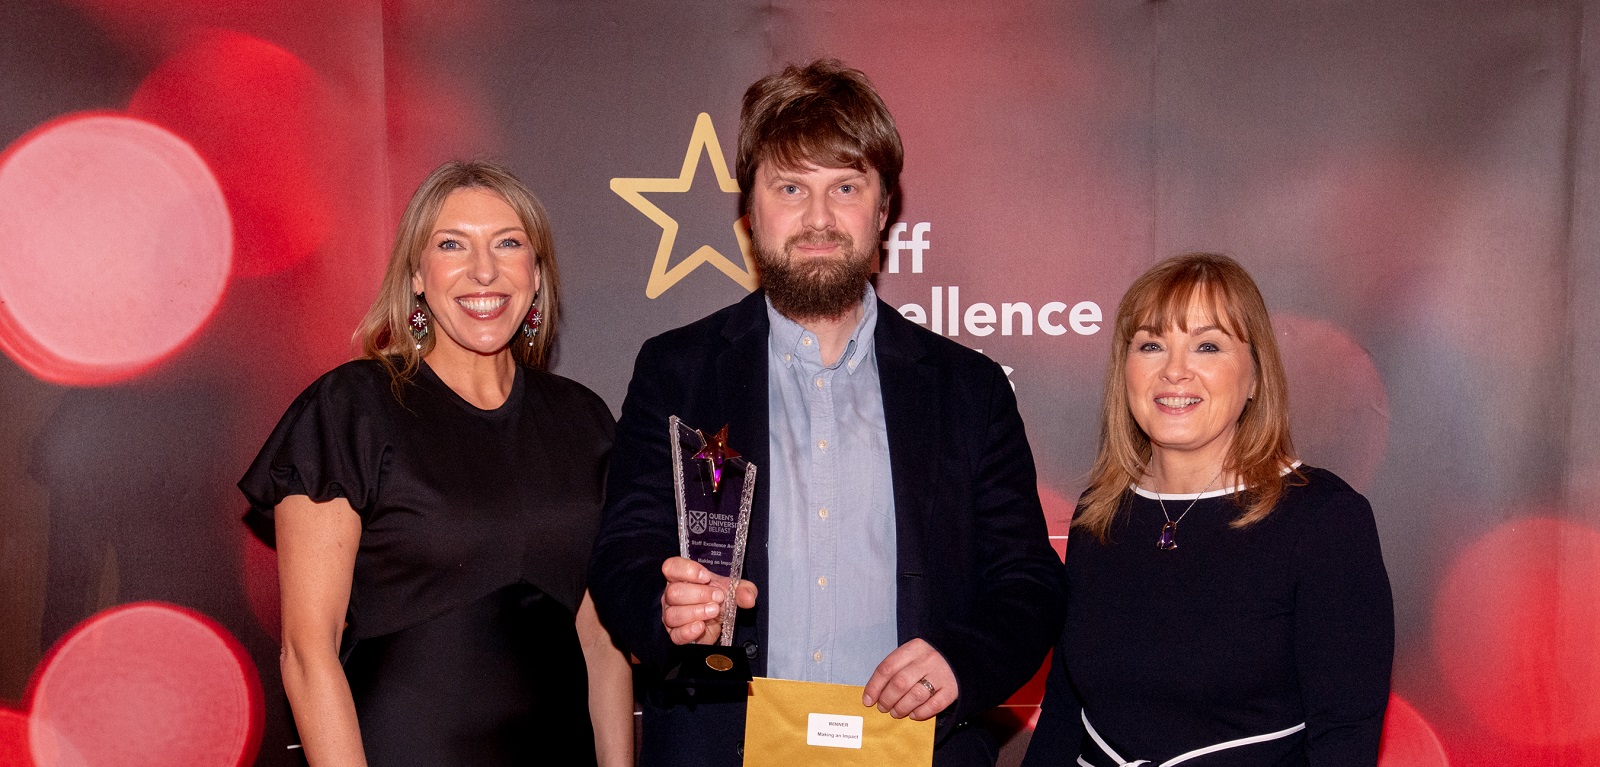 Neil Galway - Making an Impact Award winner (centre), with compere Alexandra Ford and Mairead Regan, Chair of the Staff Excellence Awards Judging Panel